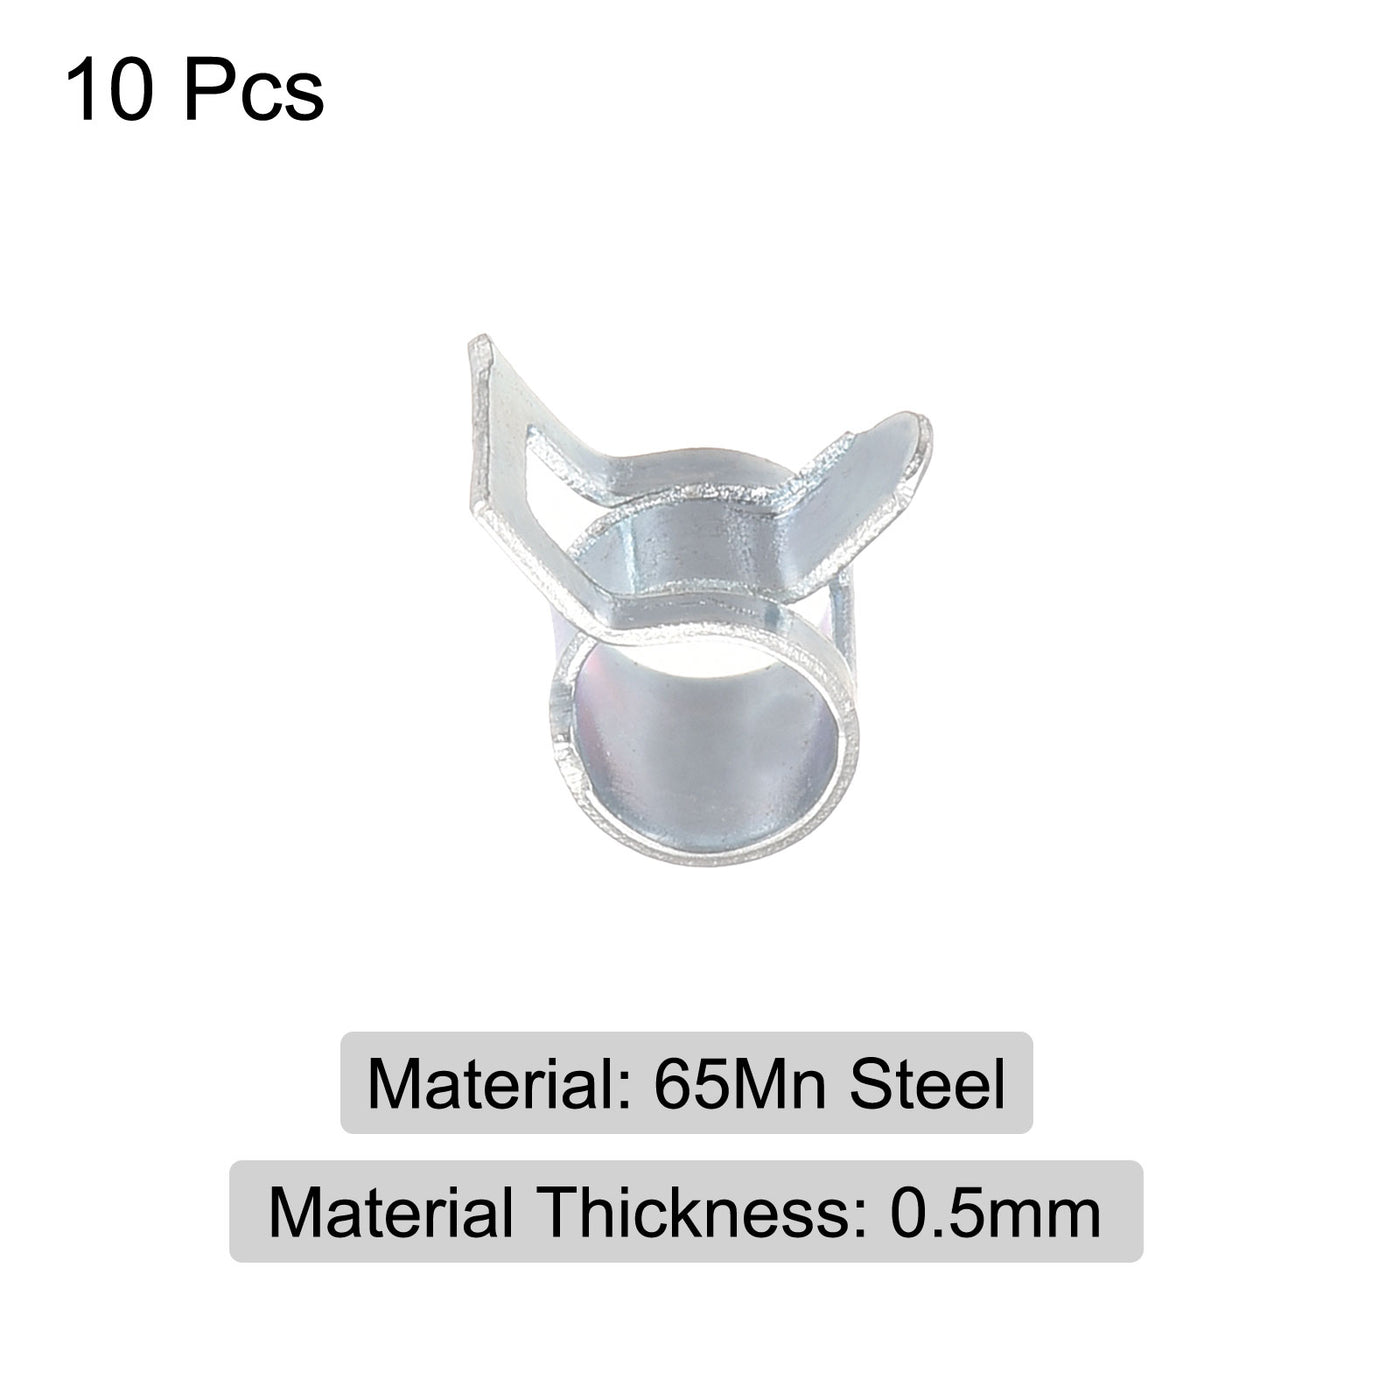 Uxcell Uxcell Spring Hose Clamp, 10pcs 65Mn Steel 14mm Low Pressure Air Clip, Zinc Plated